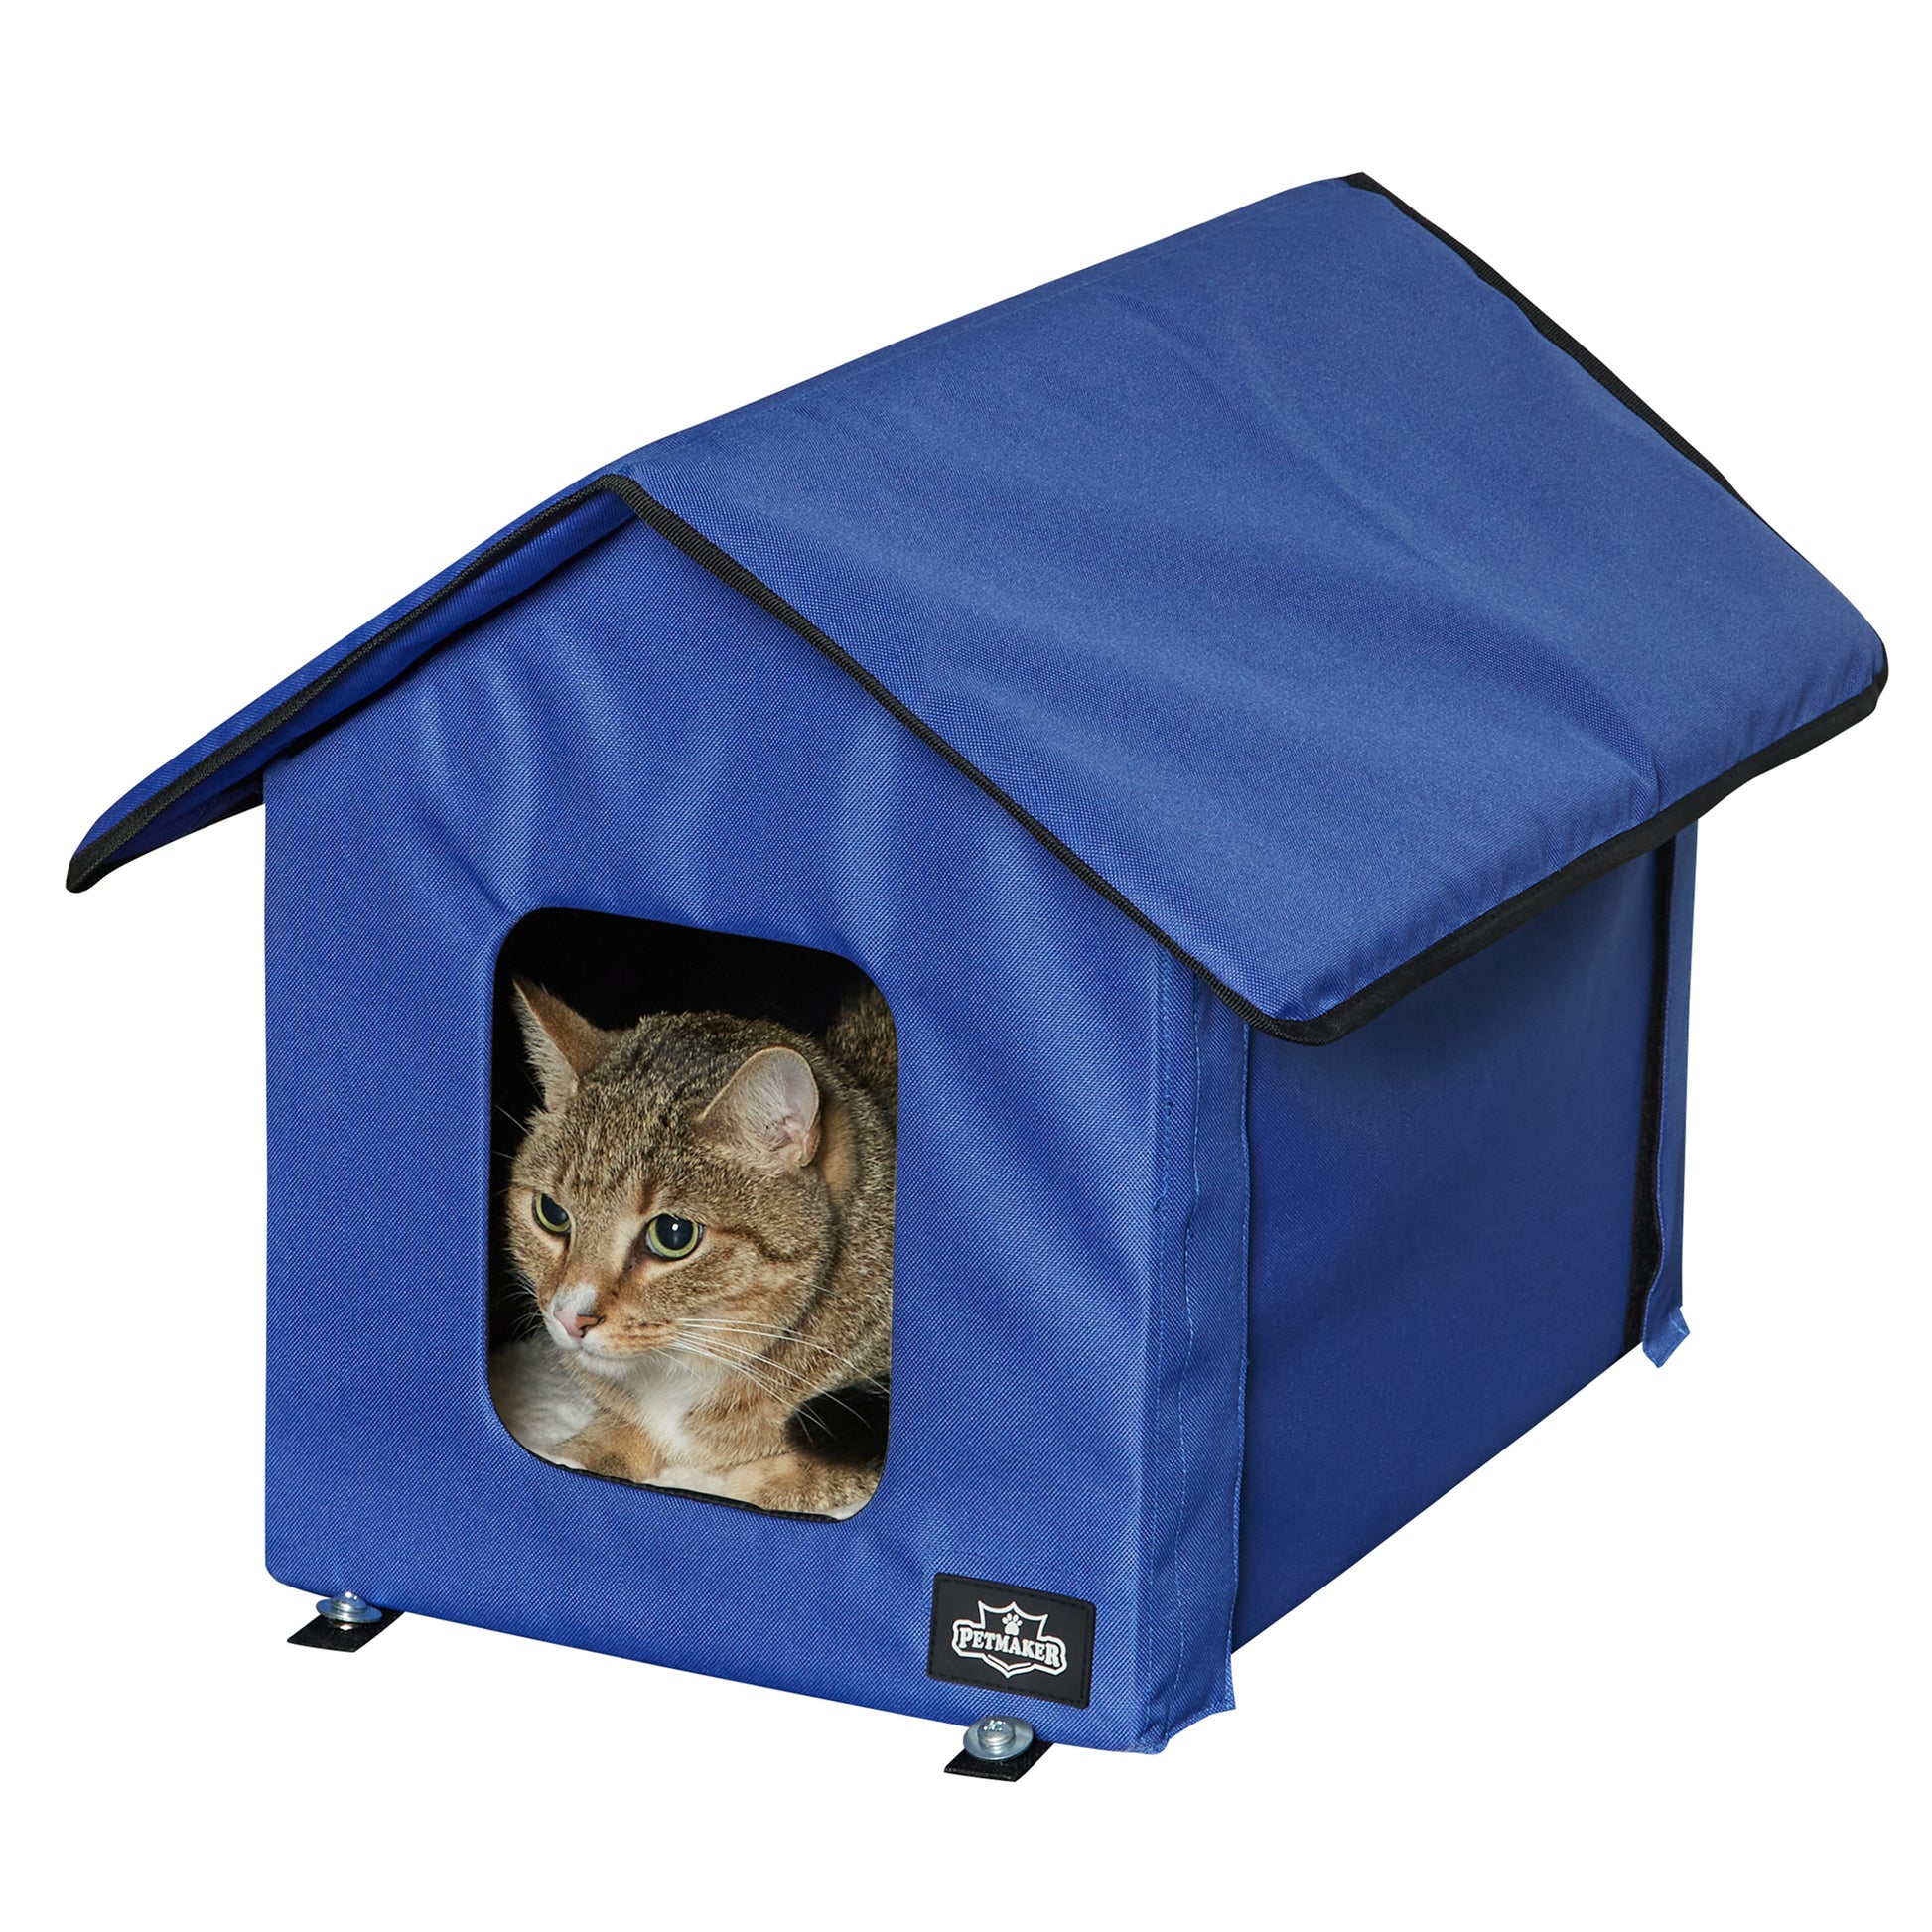 Calico cat sits safely within a pethouse while keeping watch on the outside environment.